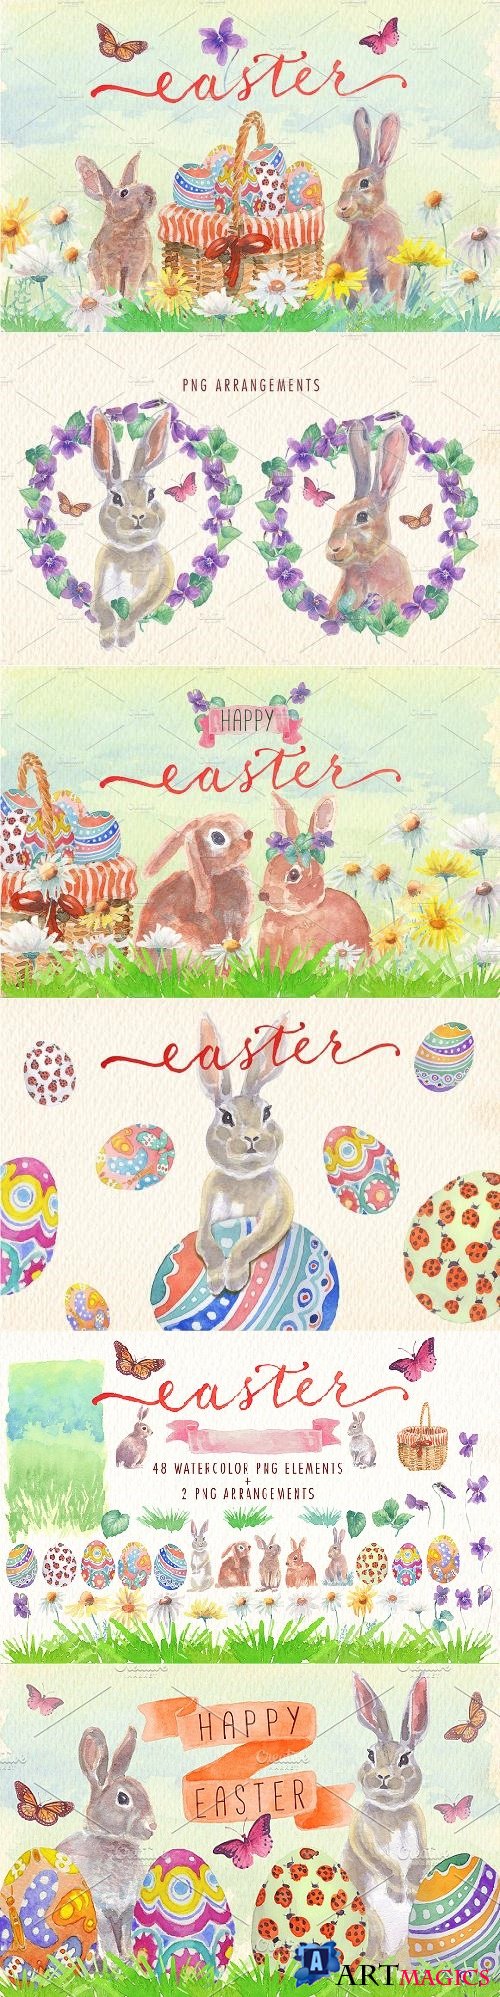 Watercolor Easter Clipart Set - 2337975